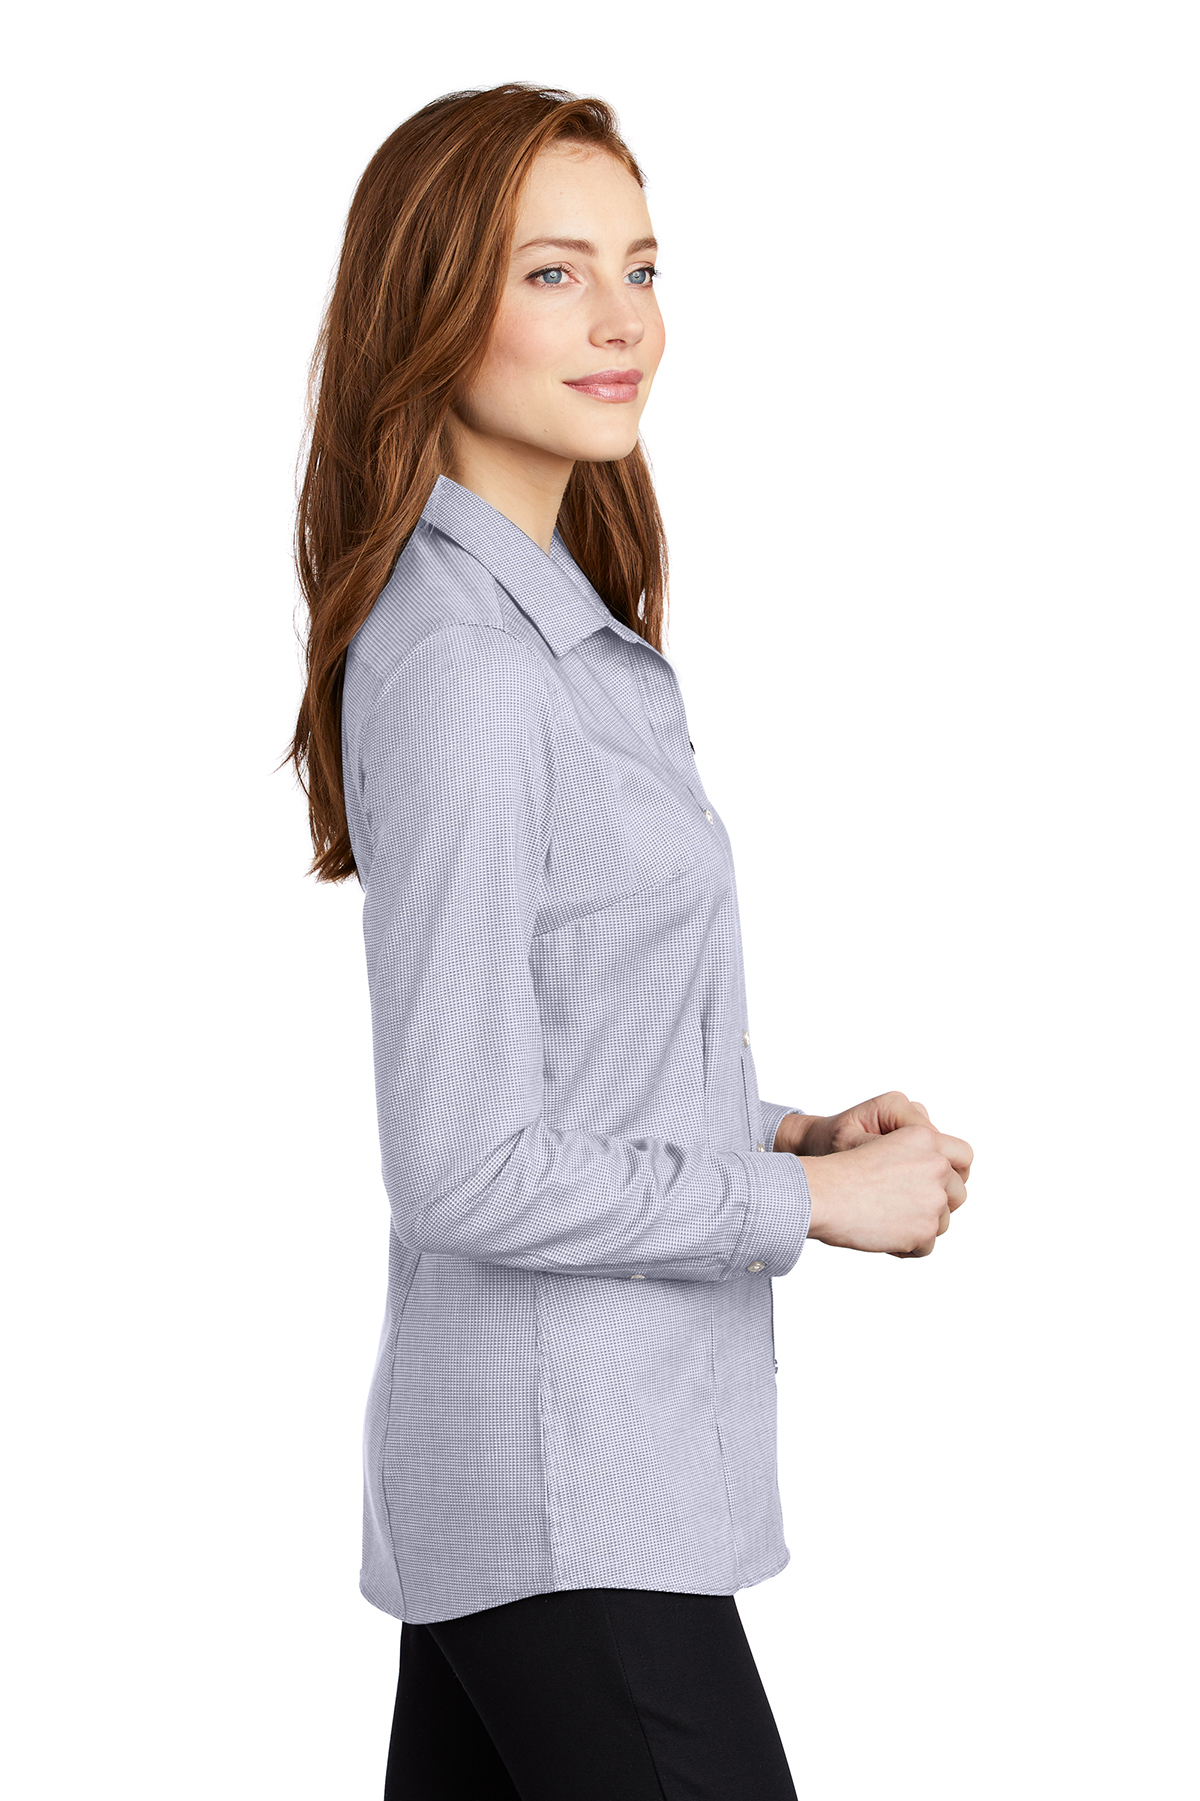 | Port Ladies Easy Shirt Care Product Authority | Authority Port Pincheck